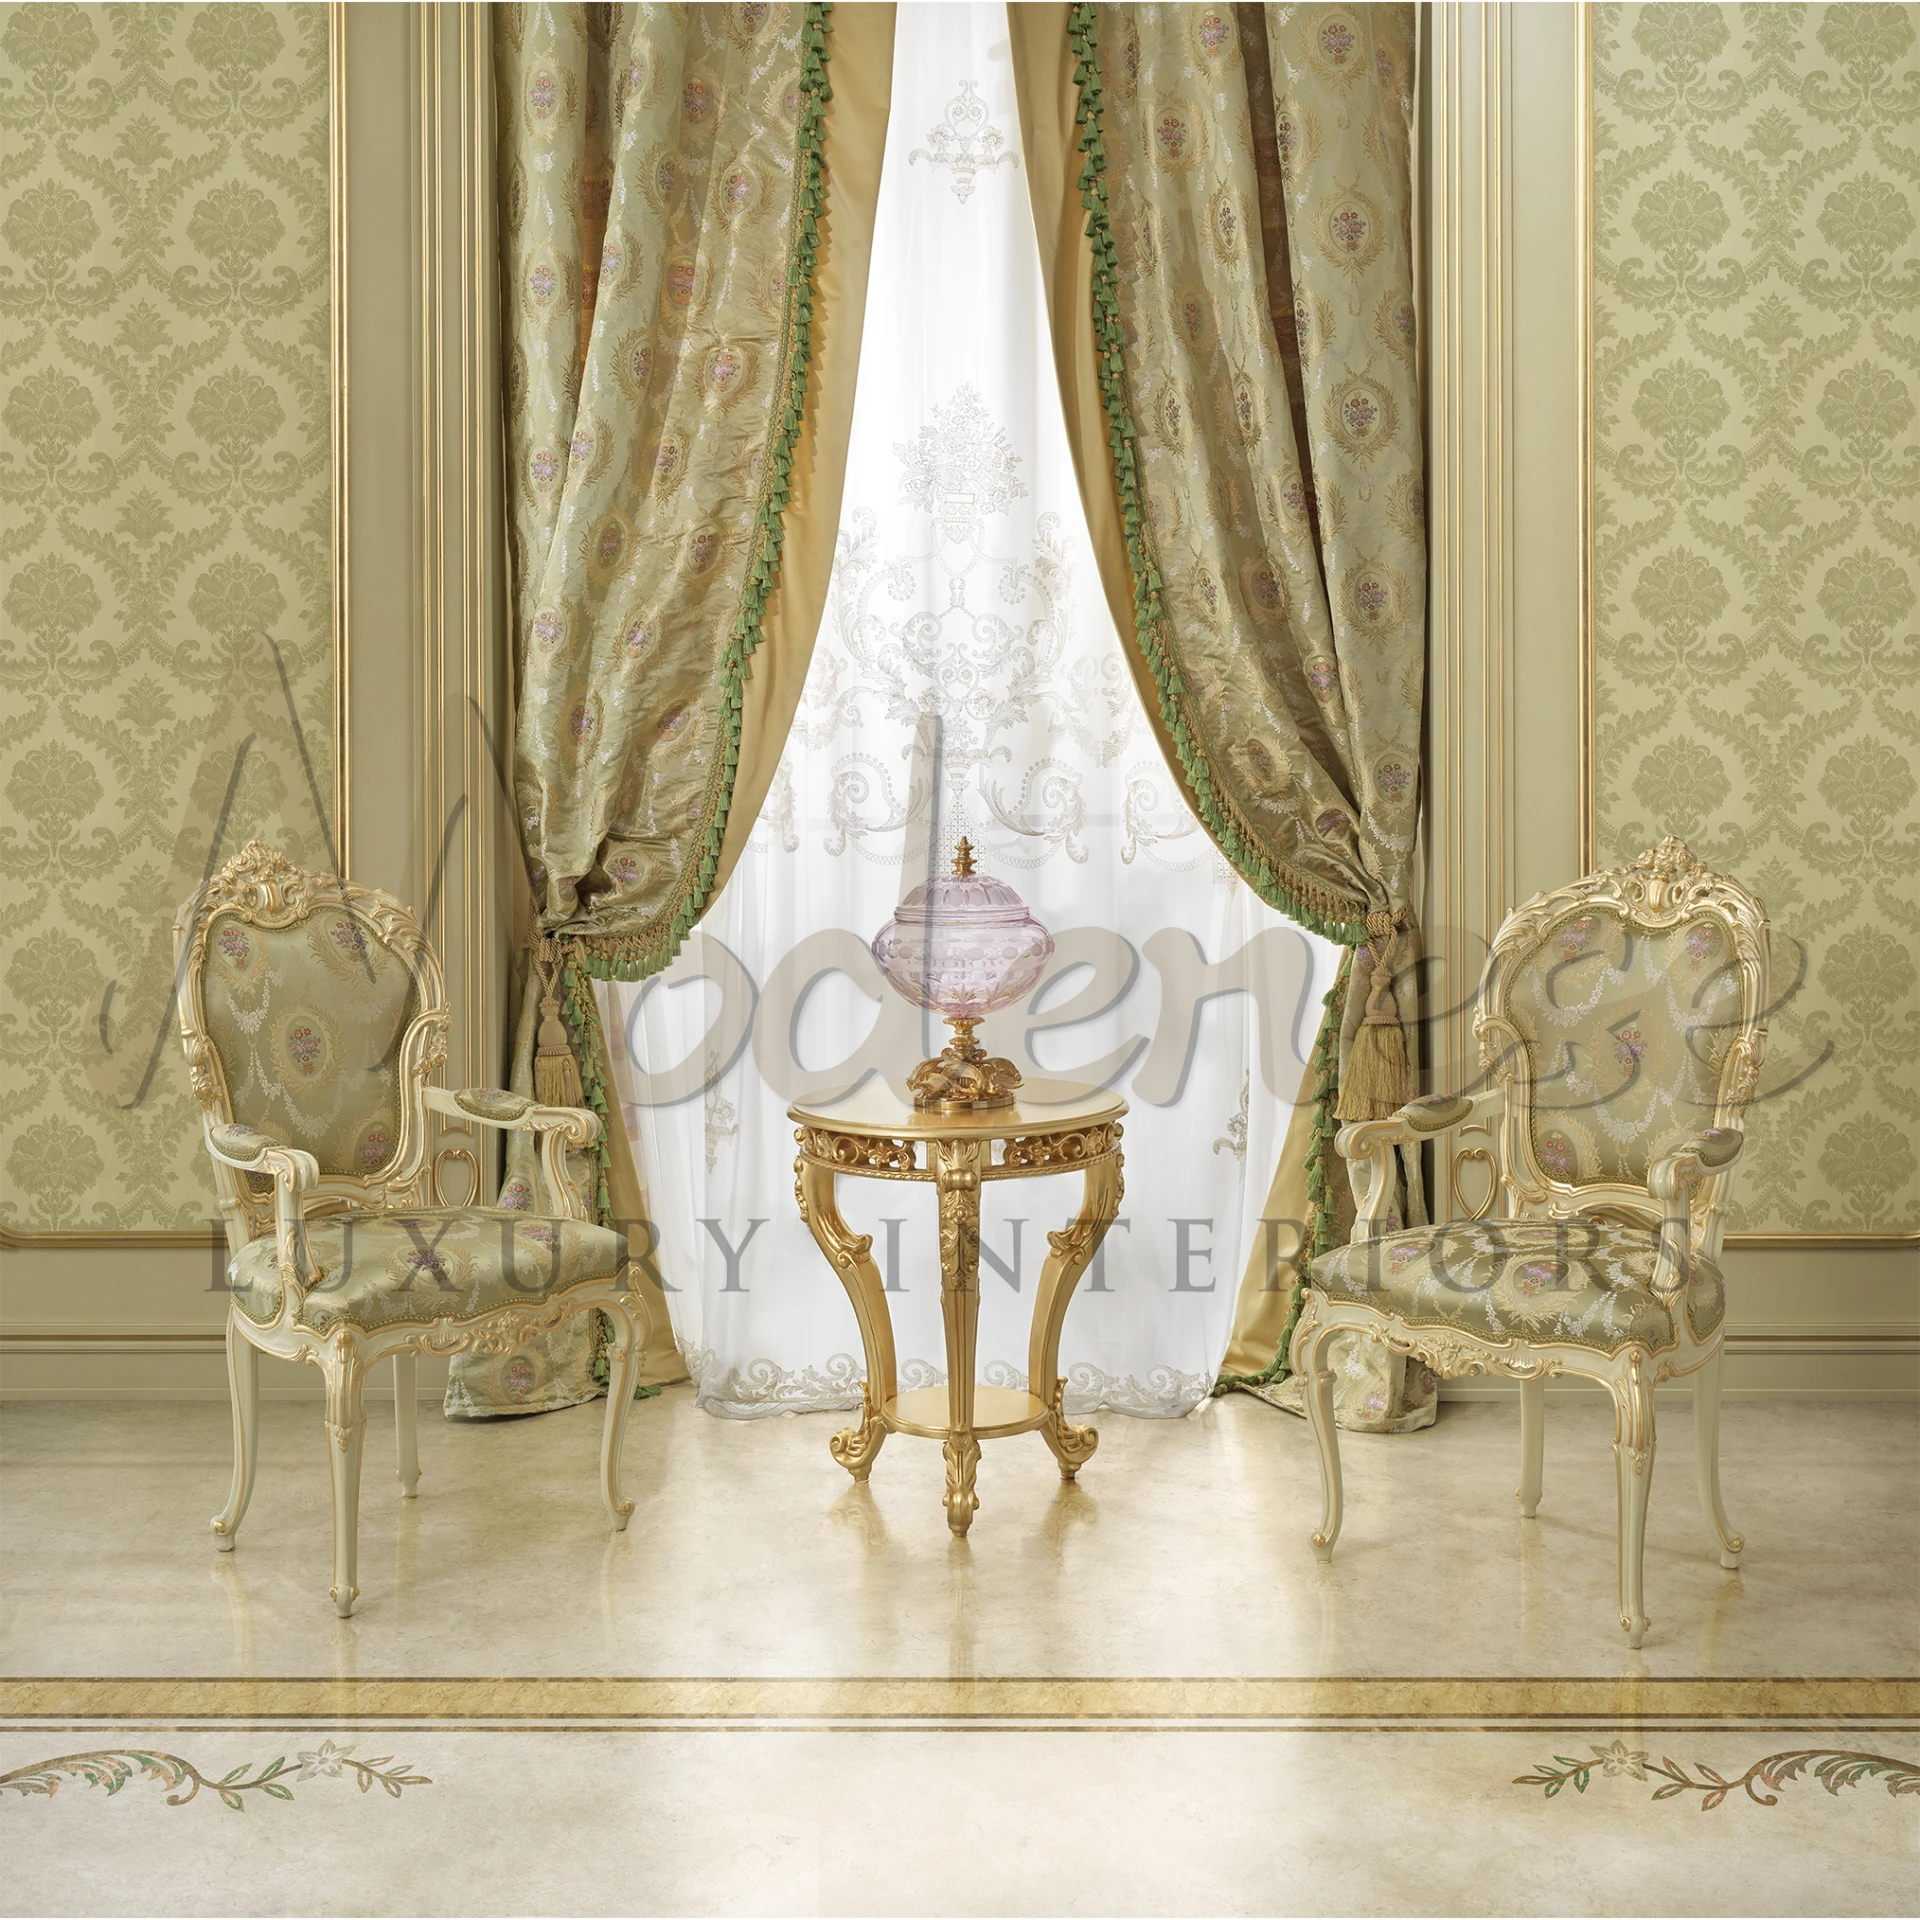 Two stylish Italian chairs flanking a small table with a decorative vase against fancy drapery and wallpaper.